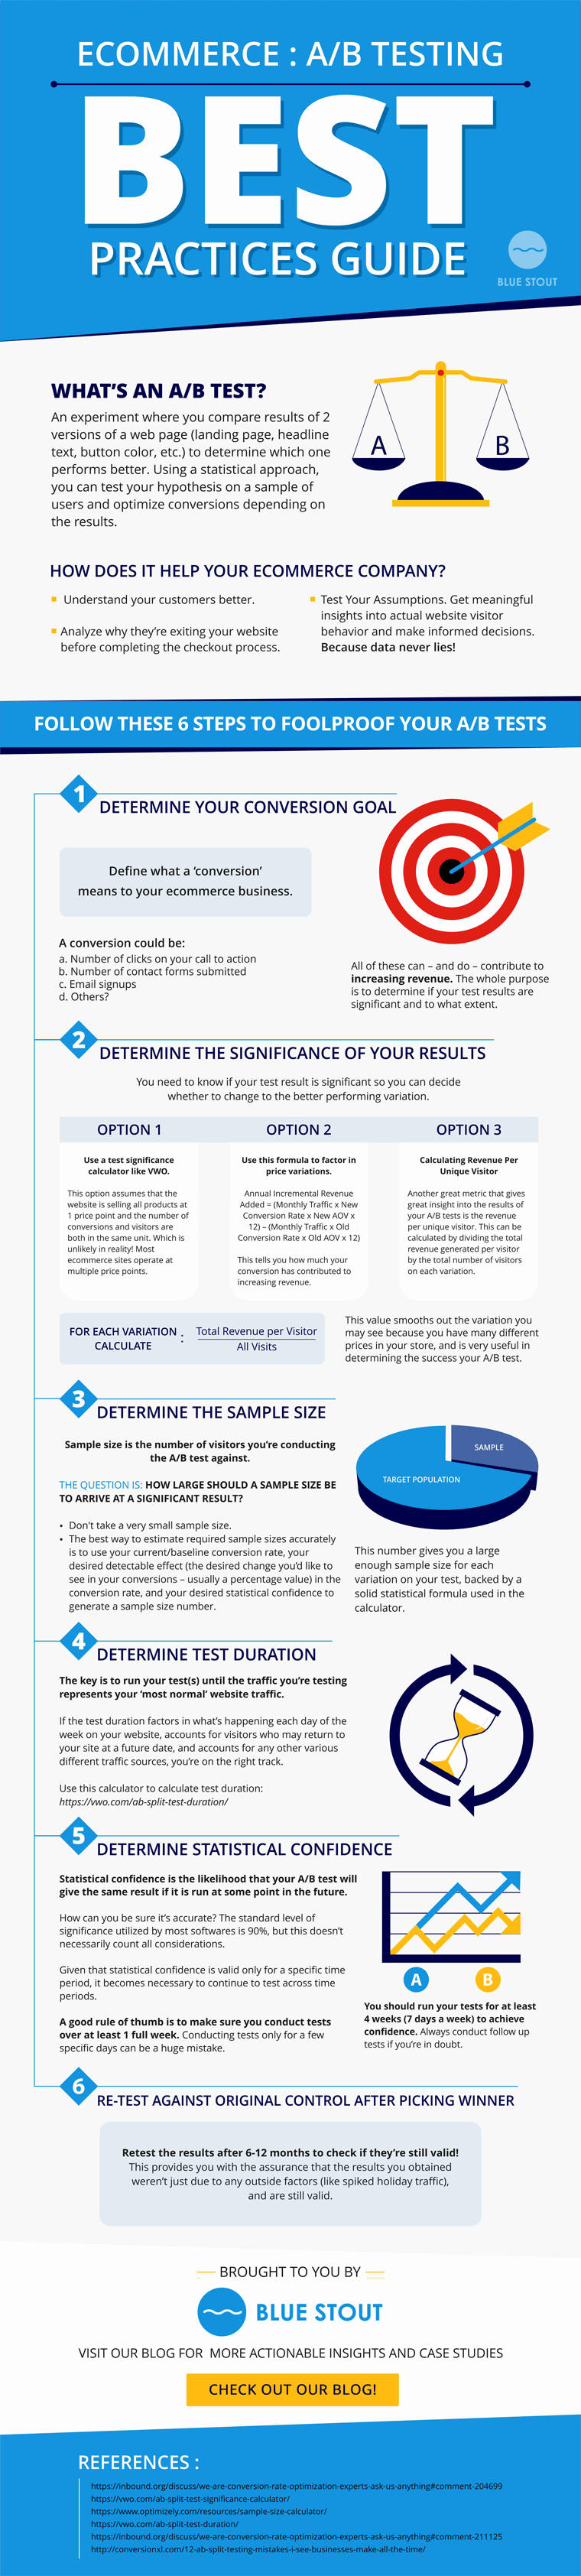 AB-testing-infographic-for-ecommerce-Blue-Stout